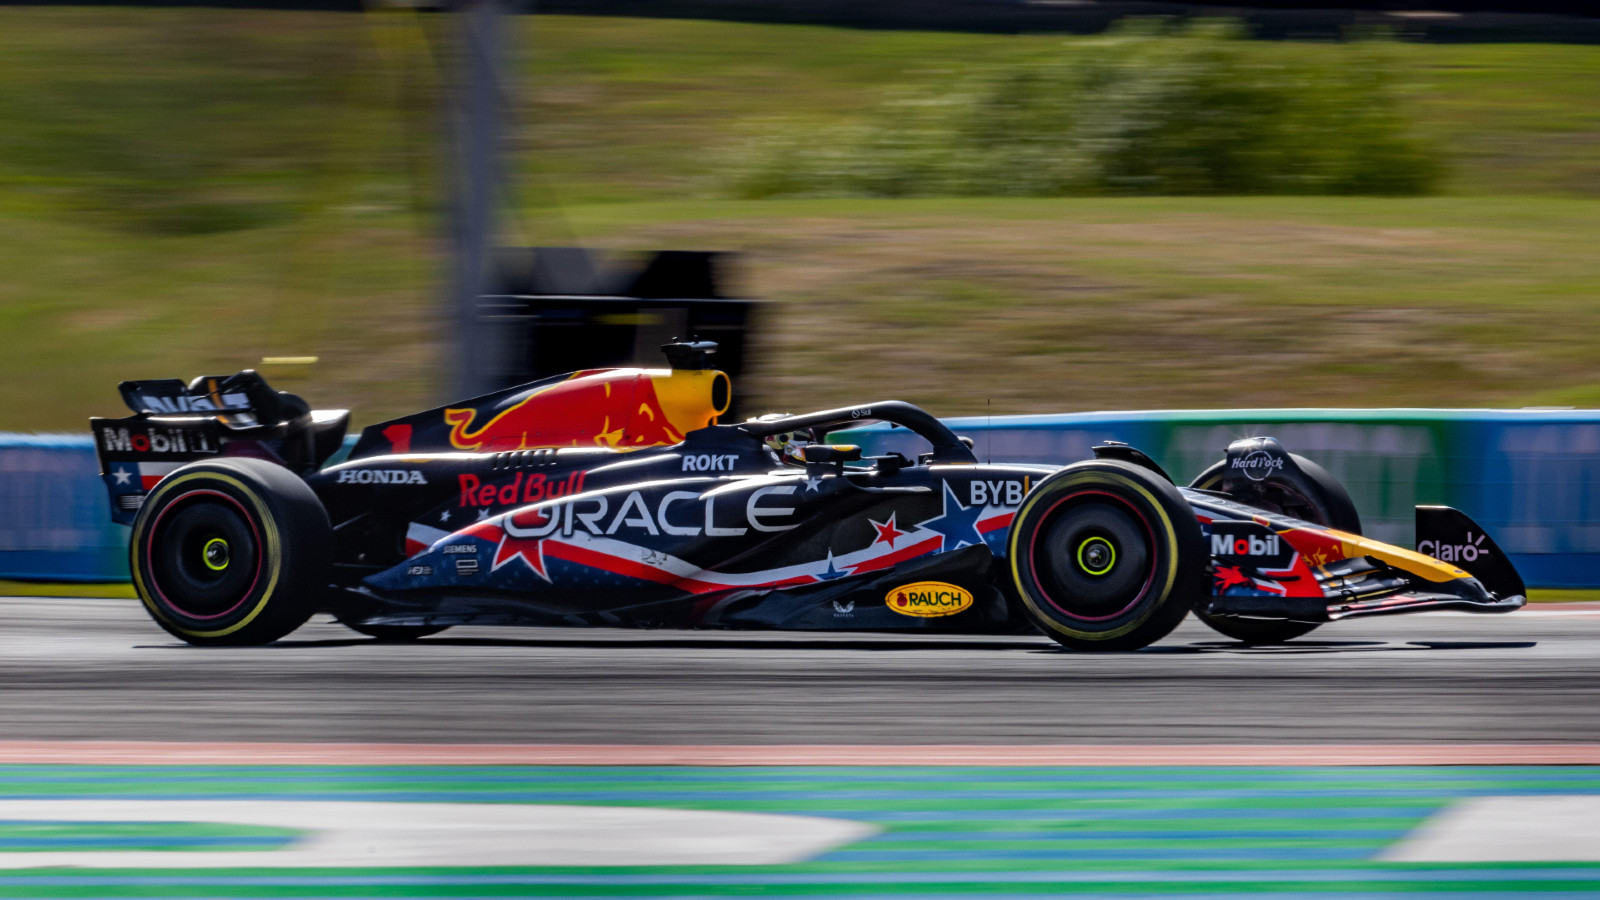 Why will Red Bull pay a historic entry fee in F1 next season?